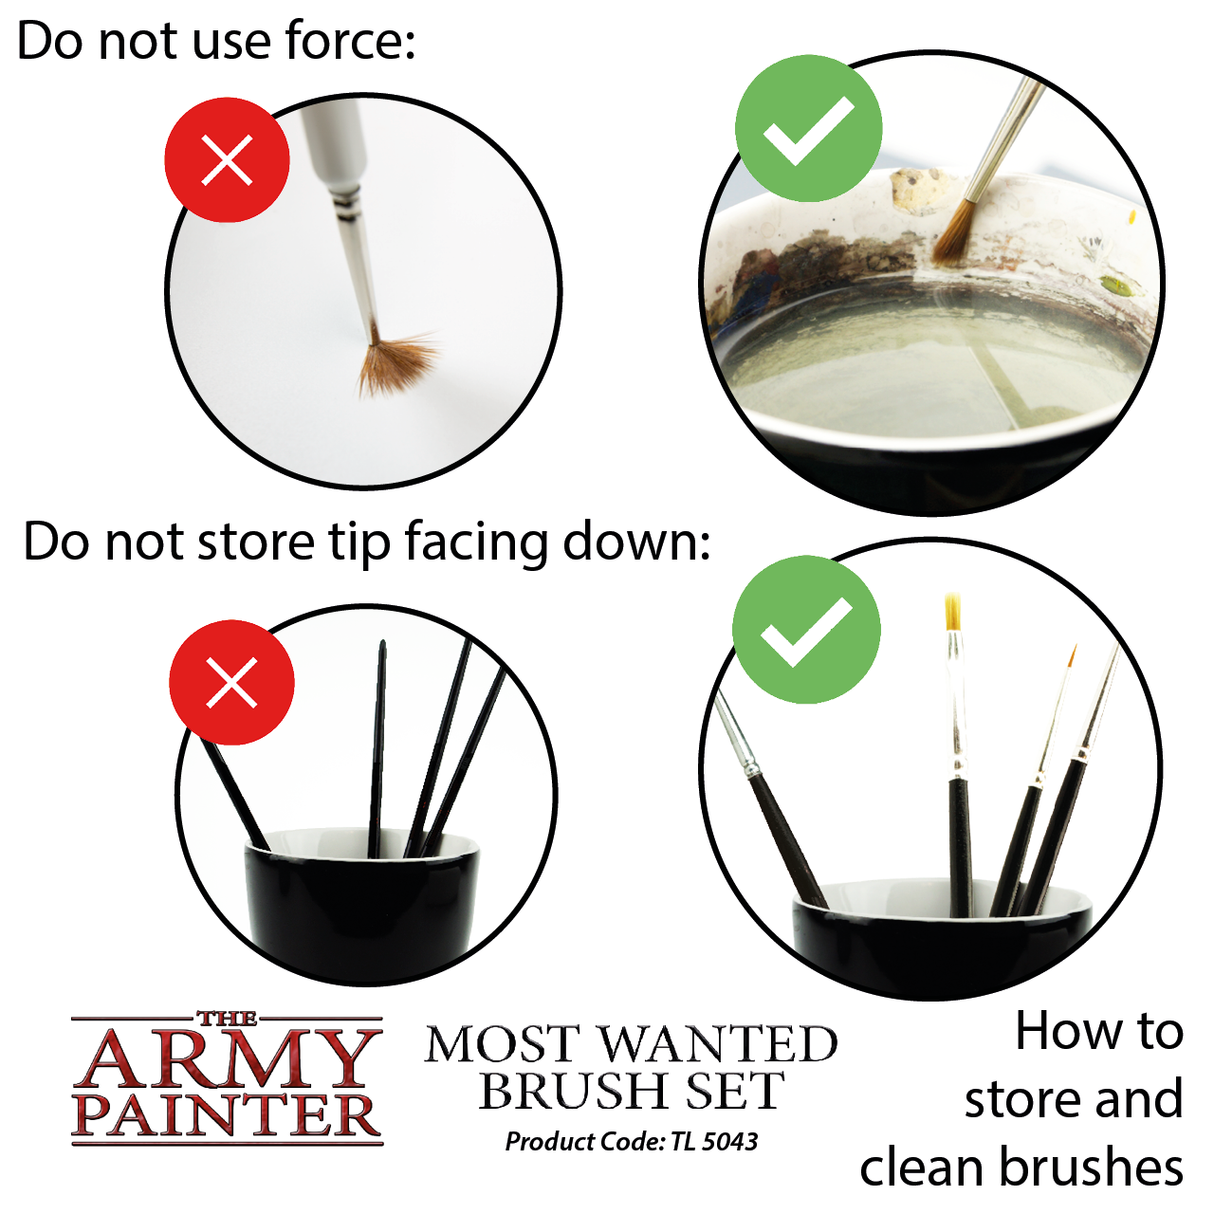 Army Painter: Most Wanted - Brush Set